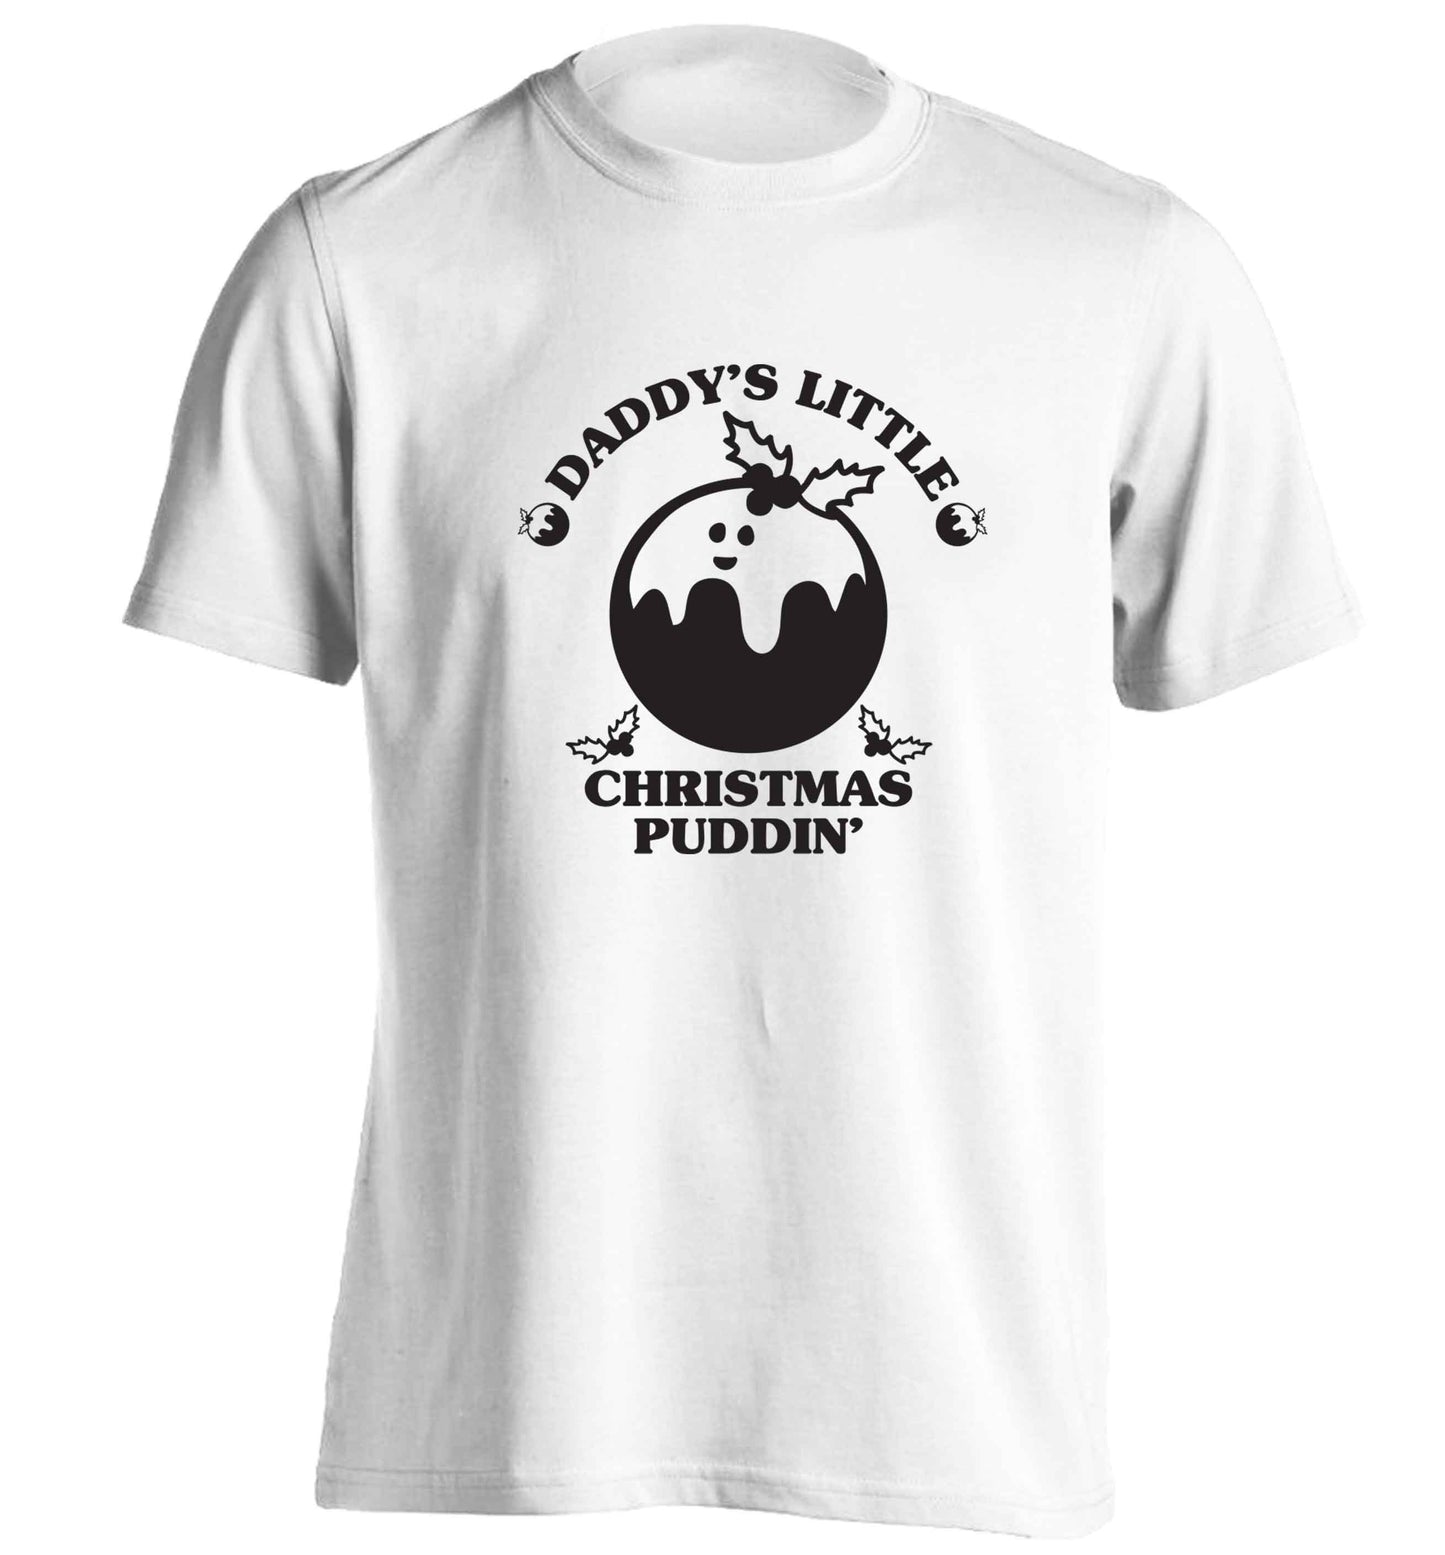 Daddy's little Christmas puddin' adults unisex white Tshirt 2XL